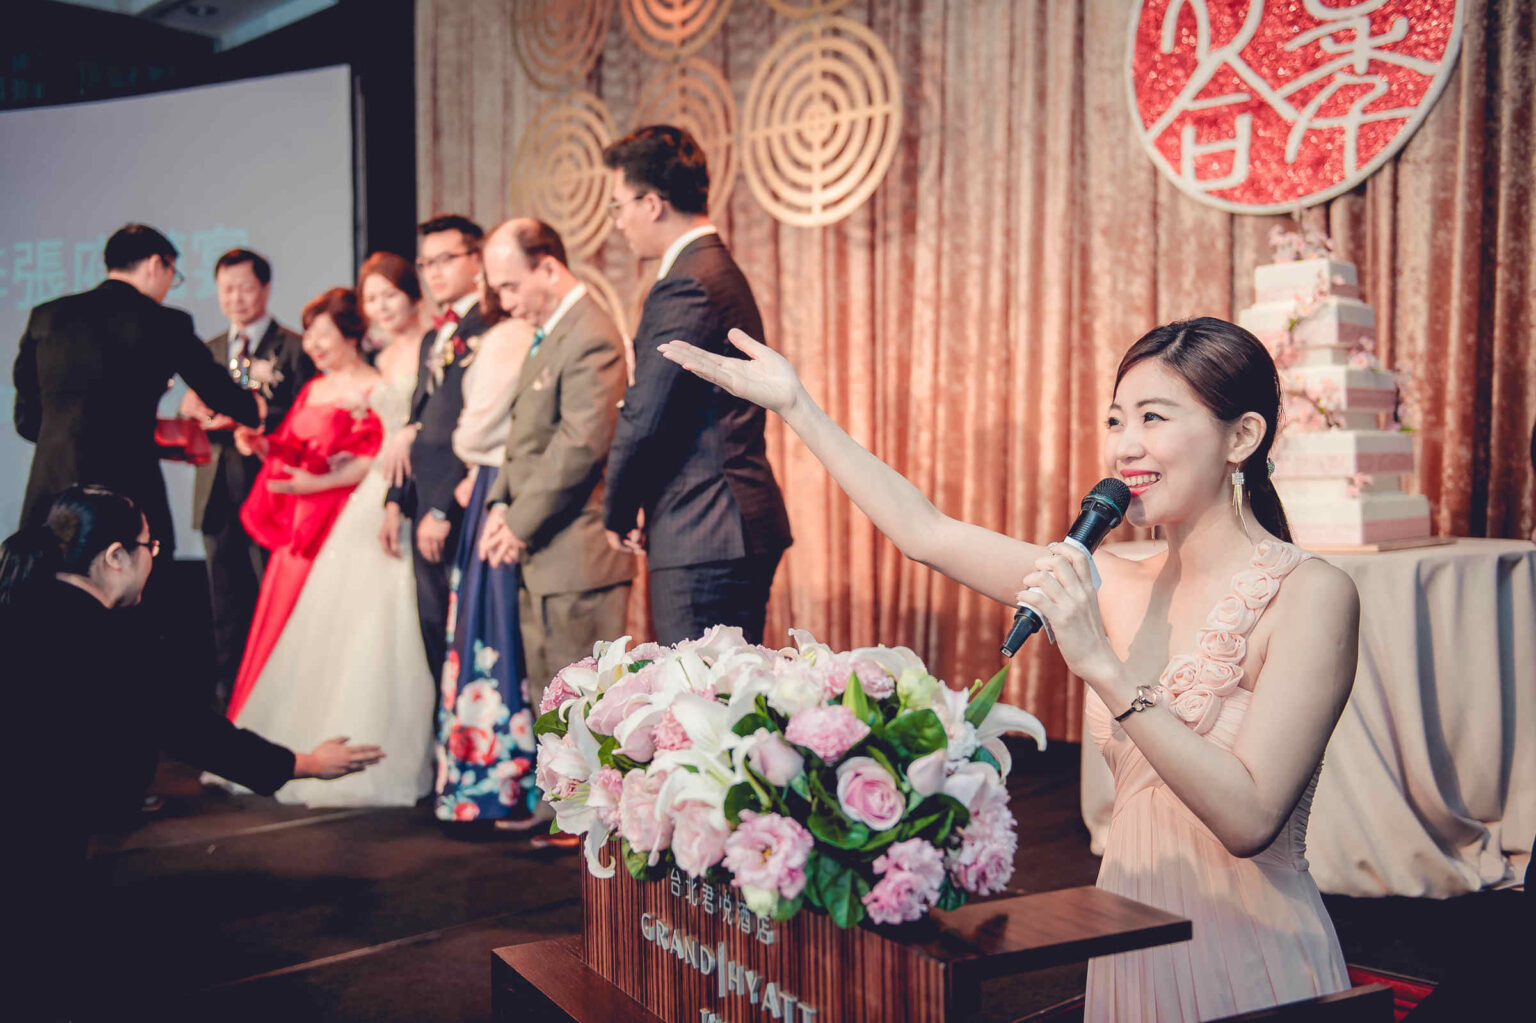 Getting ready for your next big gathering? Take notes as these handy tips guide you on how to shine as an event host with any crowd!